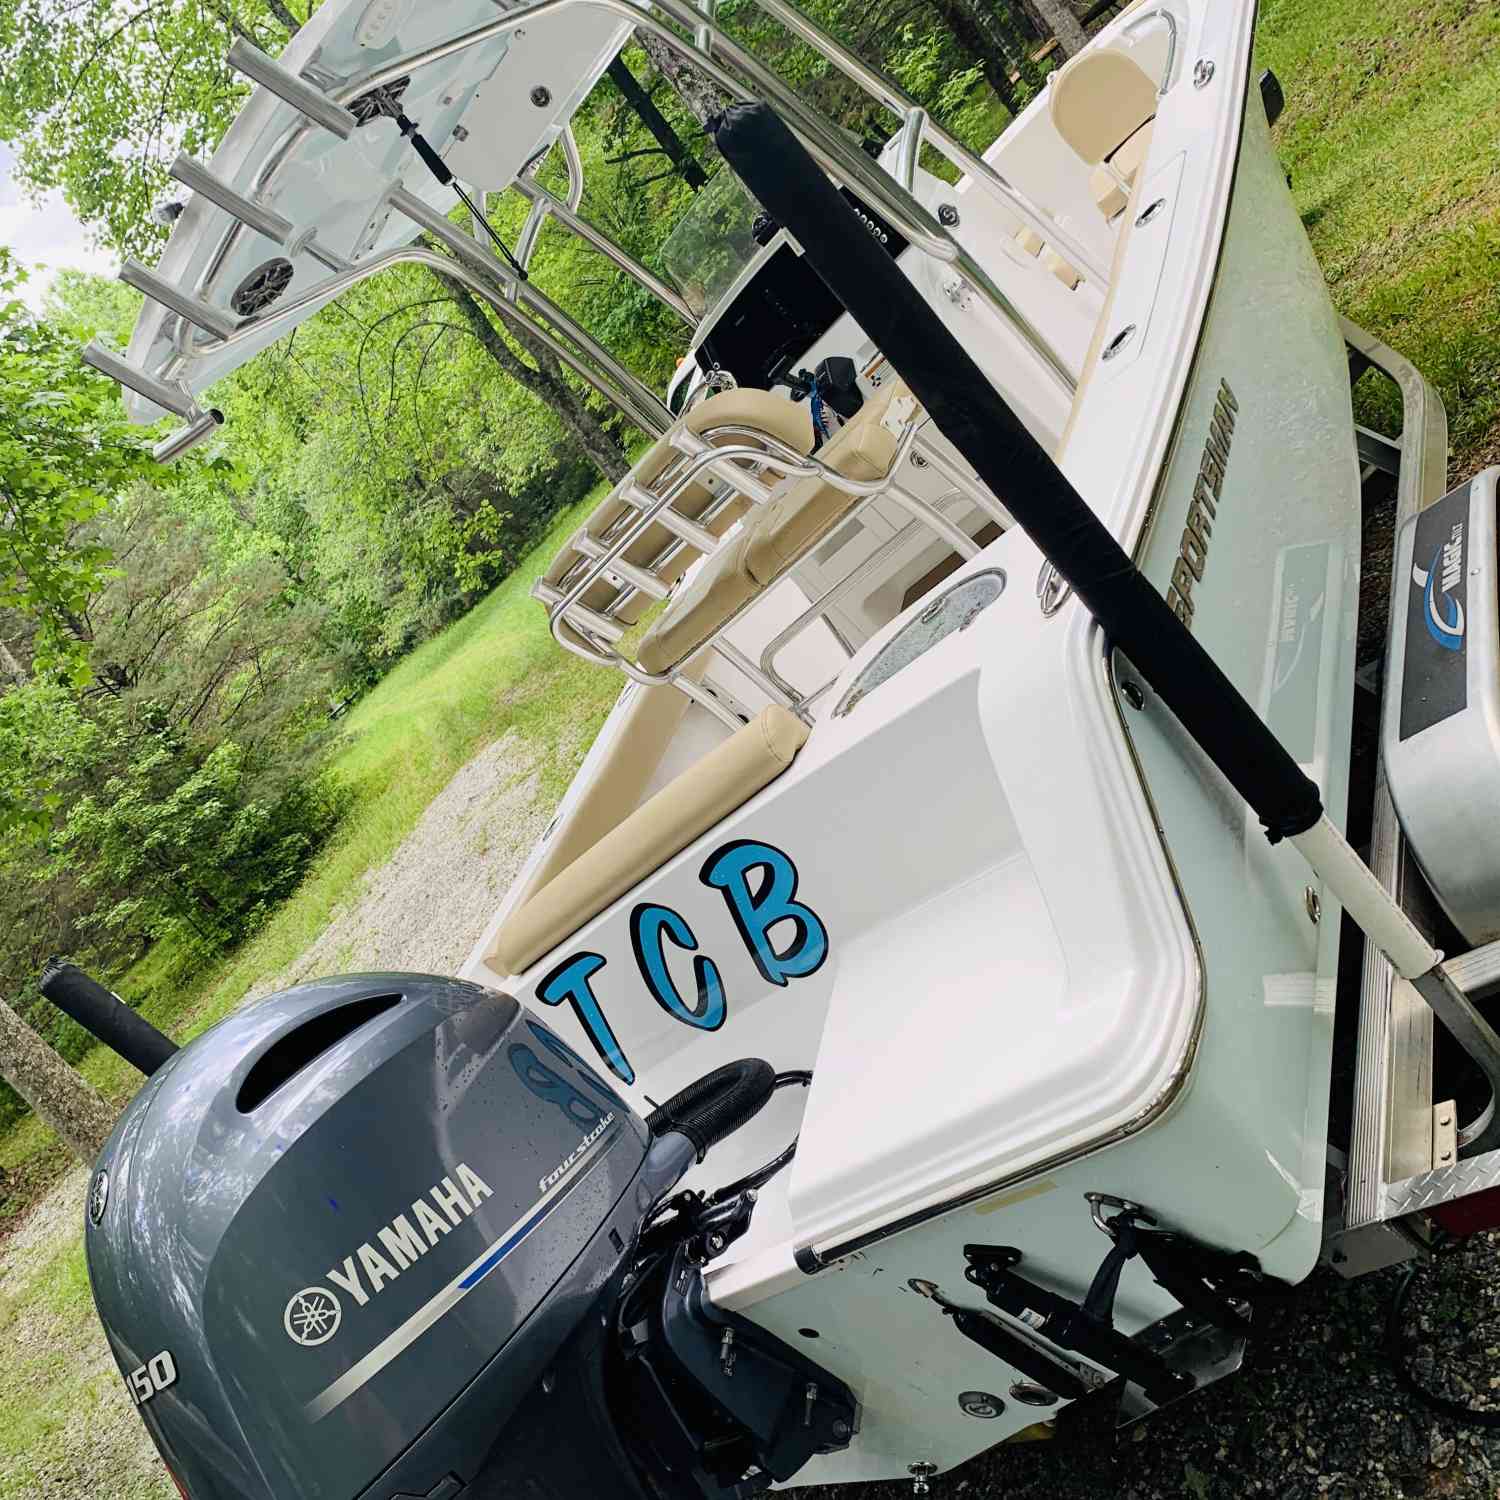 Title: TCB Baby! - On board their Sportsman Open 212 Center Console - Location: Pumpkintown, South Carolina. Participating in the Photo Contest #SportsmanJune2020